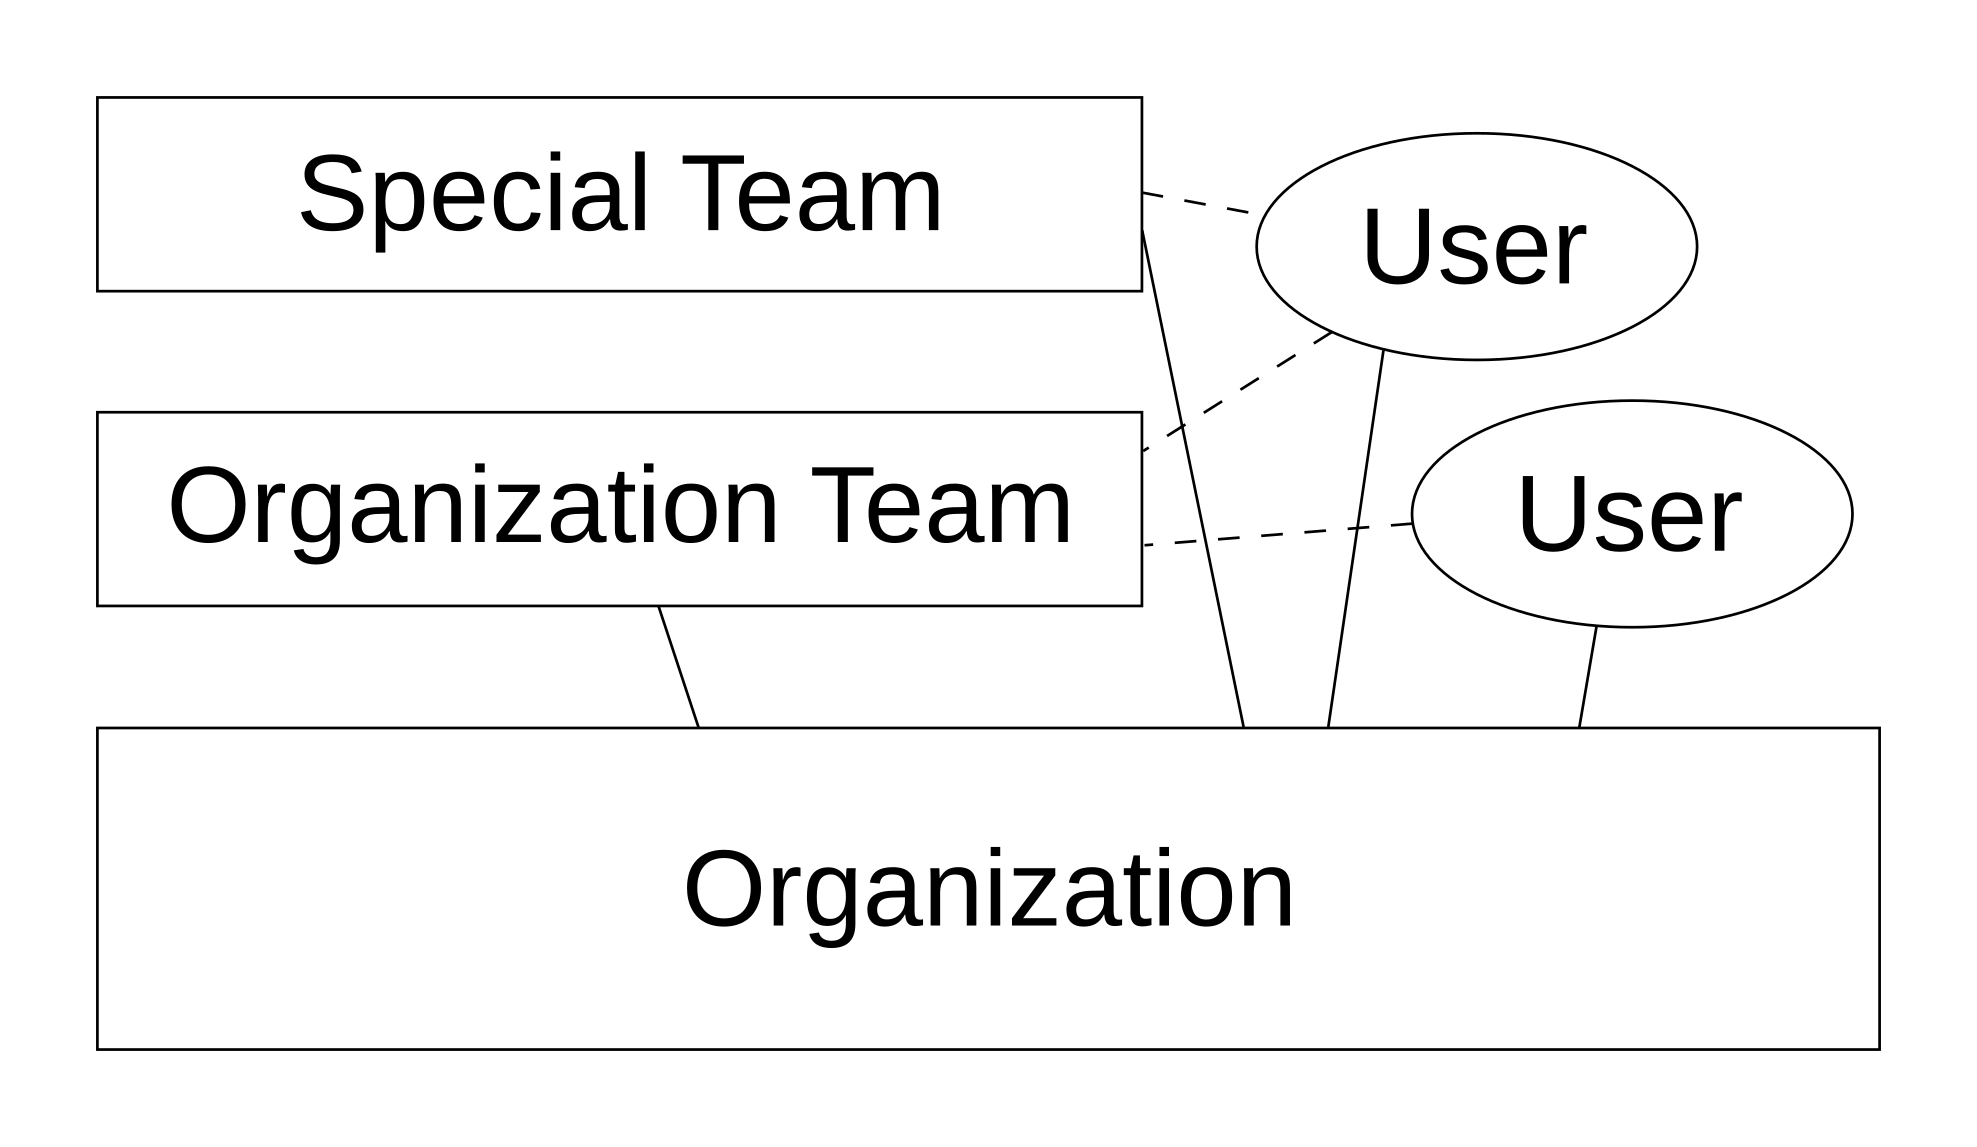 All users, annotations, and datasets belong to an organization. By default, all users are assigned to the organization team. Further teams can be created for fine-grained access permissions.